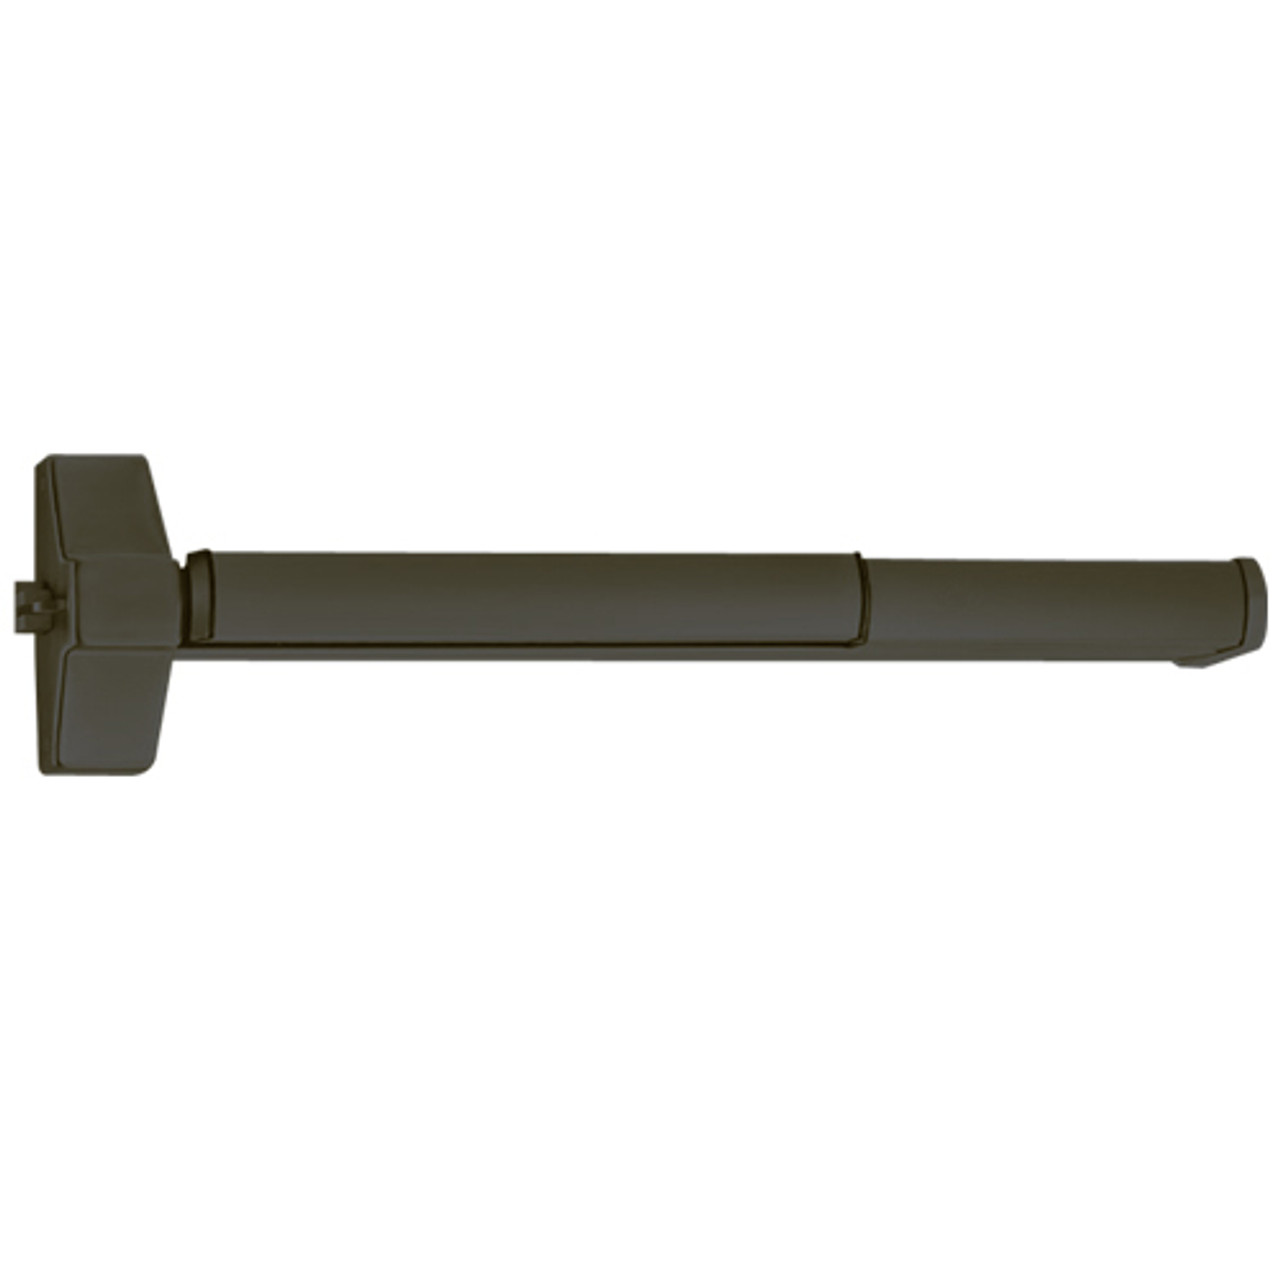 ED5200SA-613-M92 Corbin ED5200 Series Fire Rated Exit Device with Touchbar Monitoring in Oil Rubbed Bronze Finish